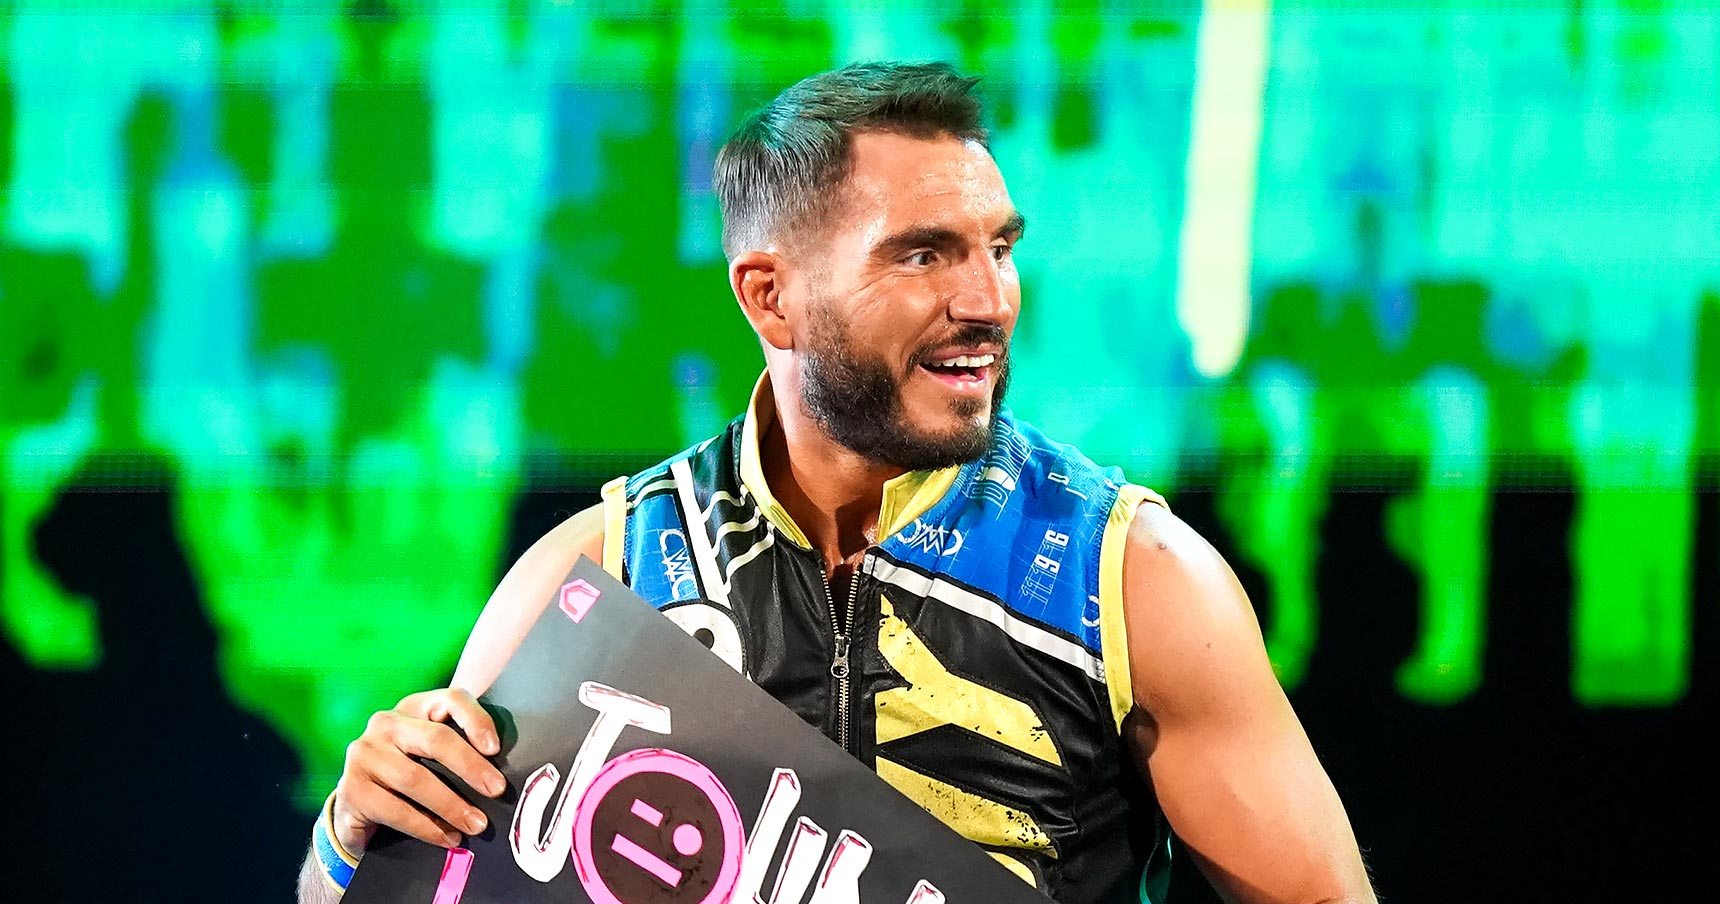 Heartbreak and Resilience: WWE Star Johnny Gargano's Family Restaurant Ravaged by Fire